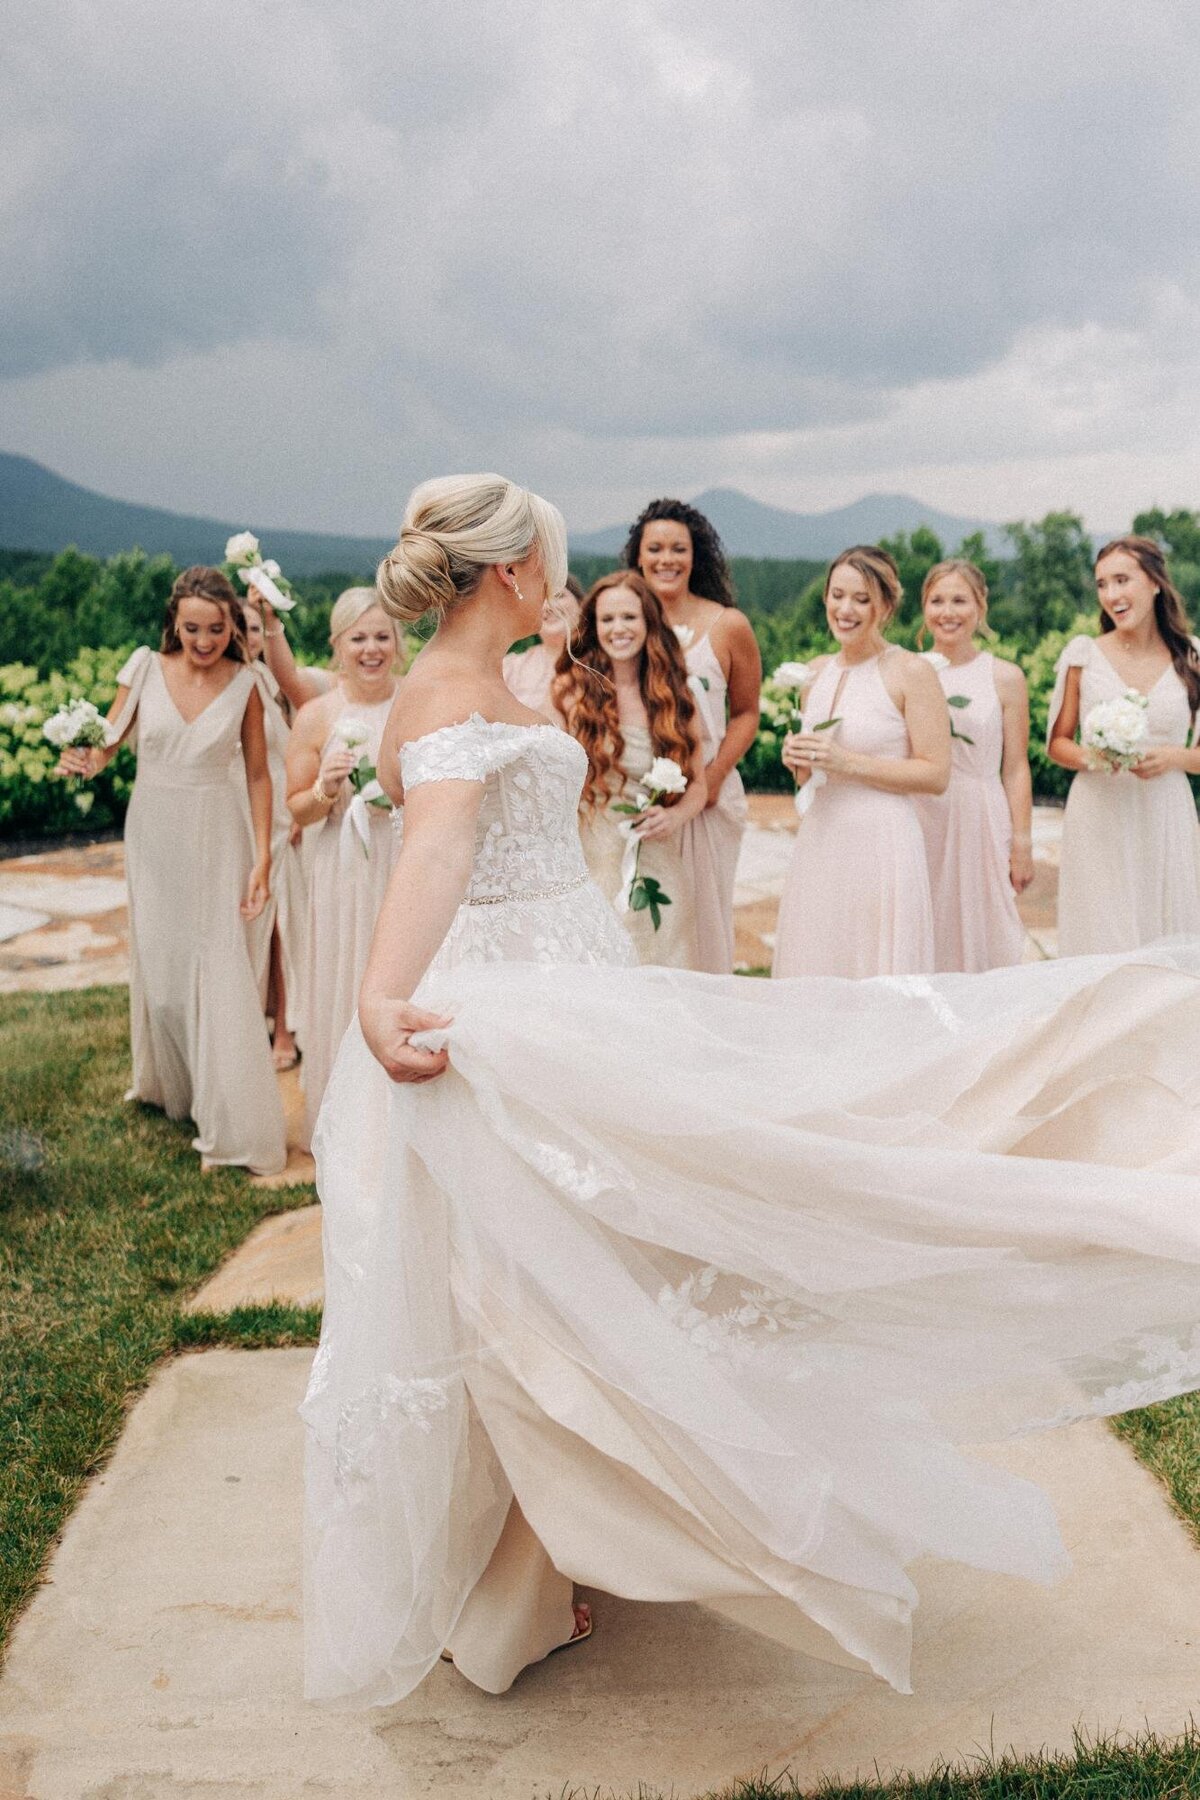 Bride in white dress with bridesmaids in pastel dresses, having a playful moment outdoors.